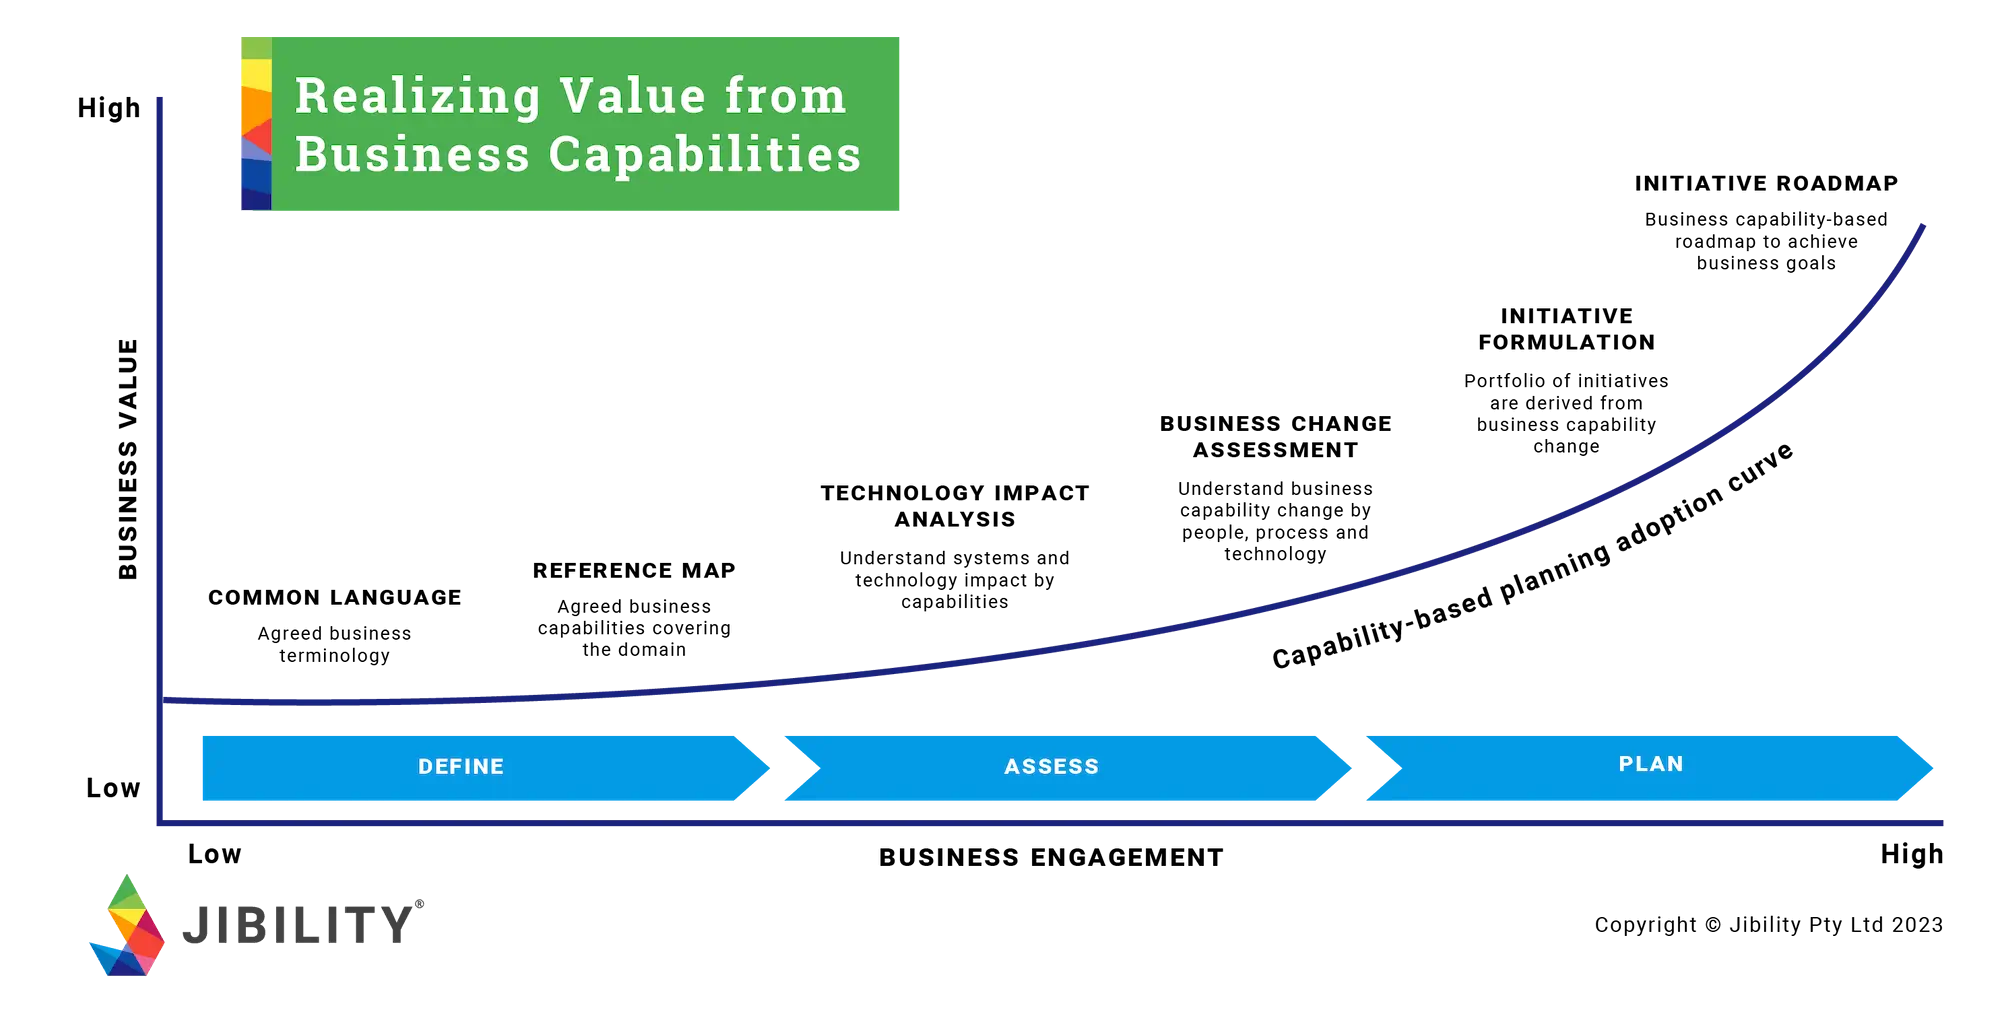 How to realize value with capability-based planning